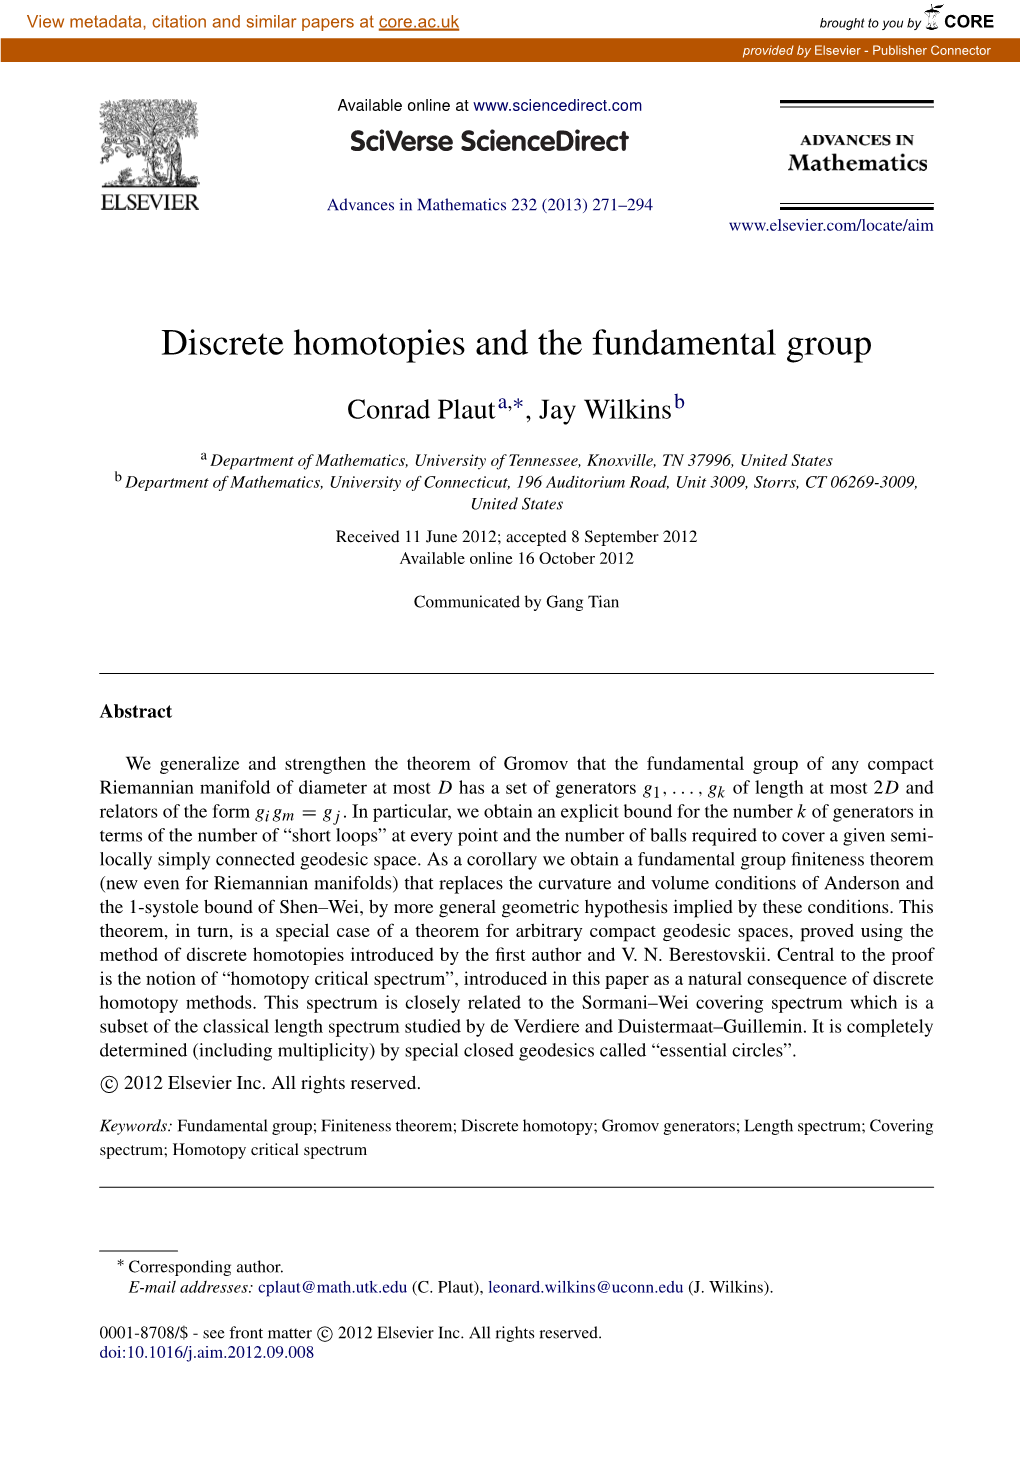 Discrete Homotopies and the Fundamental Group